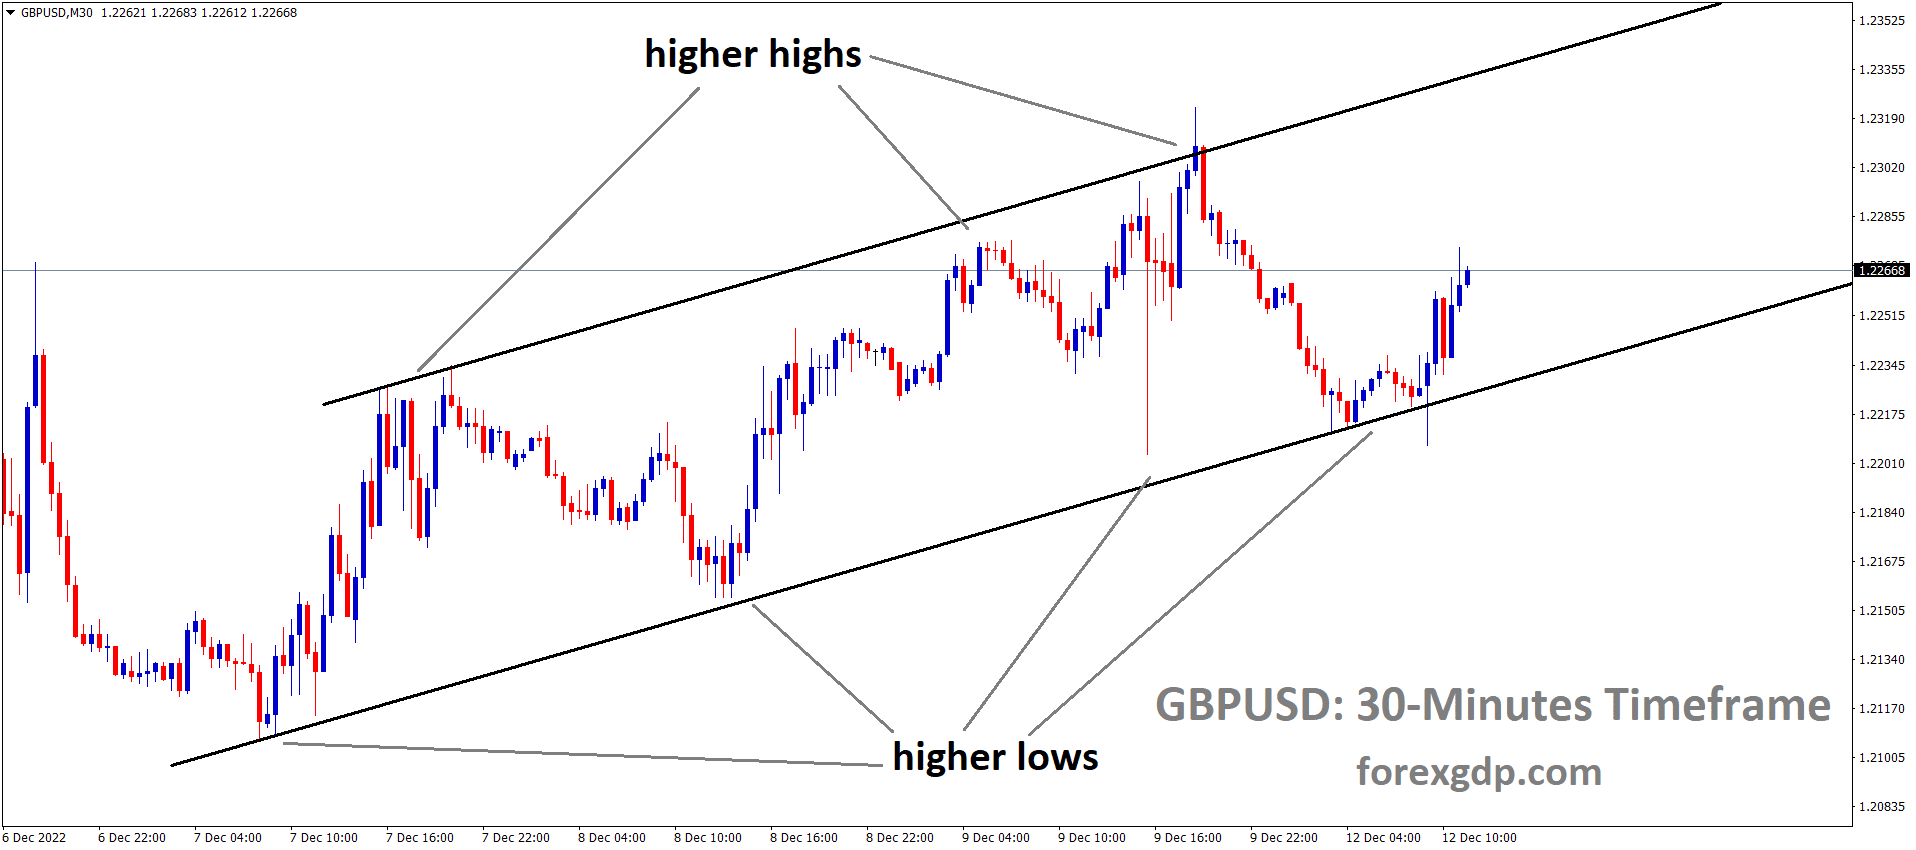 GBPUSD is moving in an Ascending channel and the market has rebounded from the higher low area of the channel